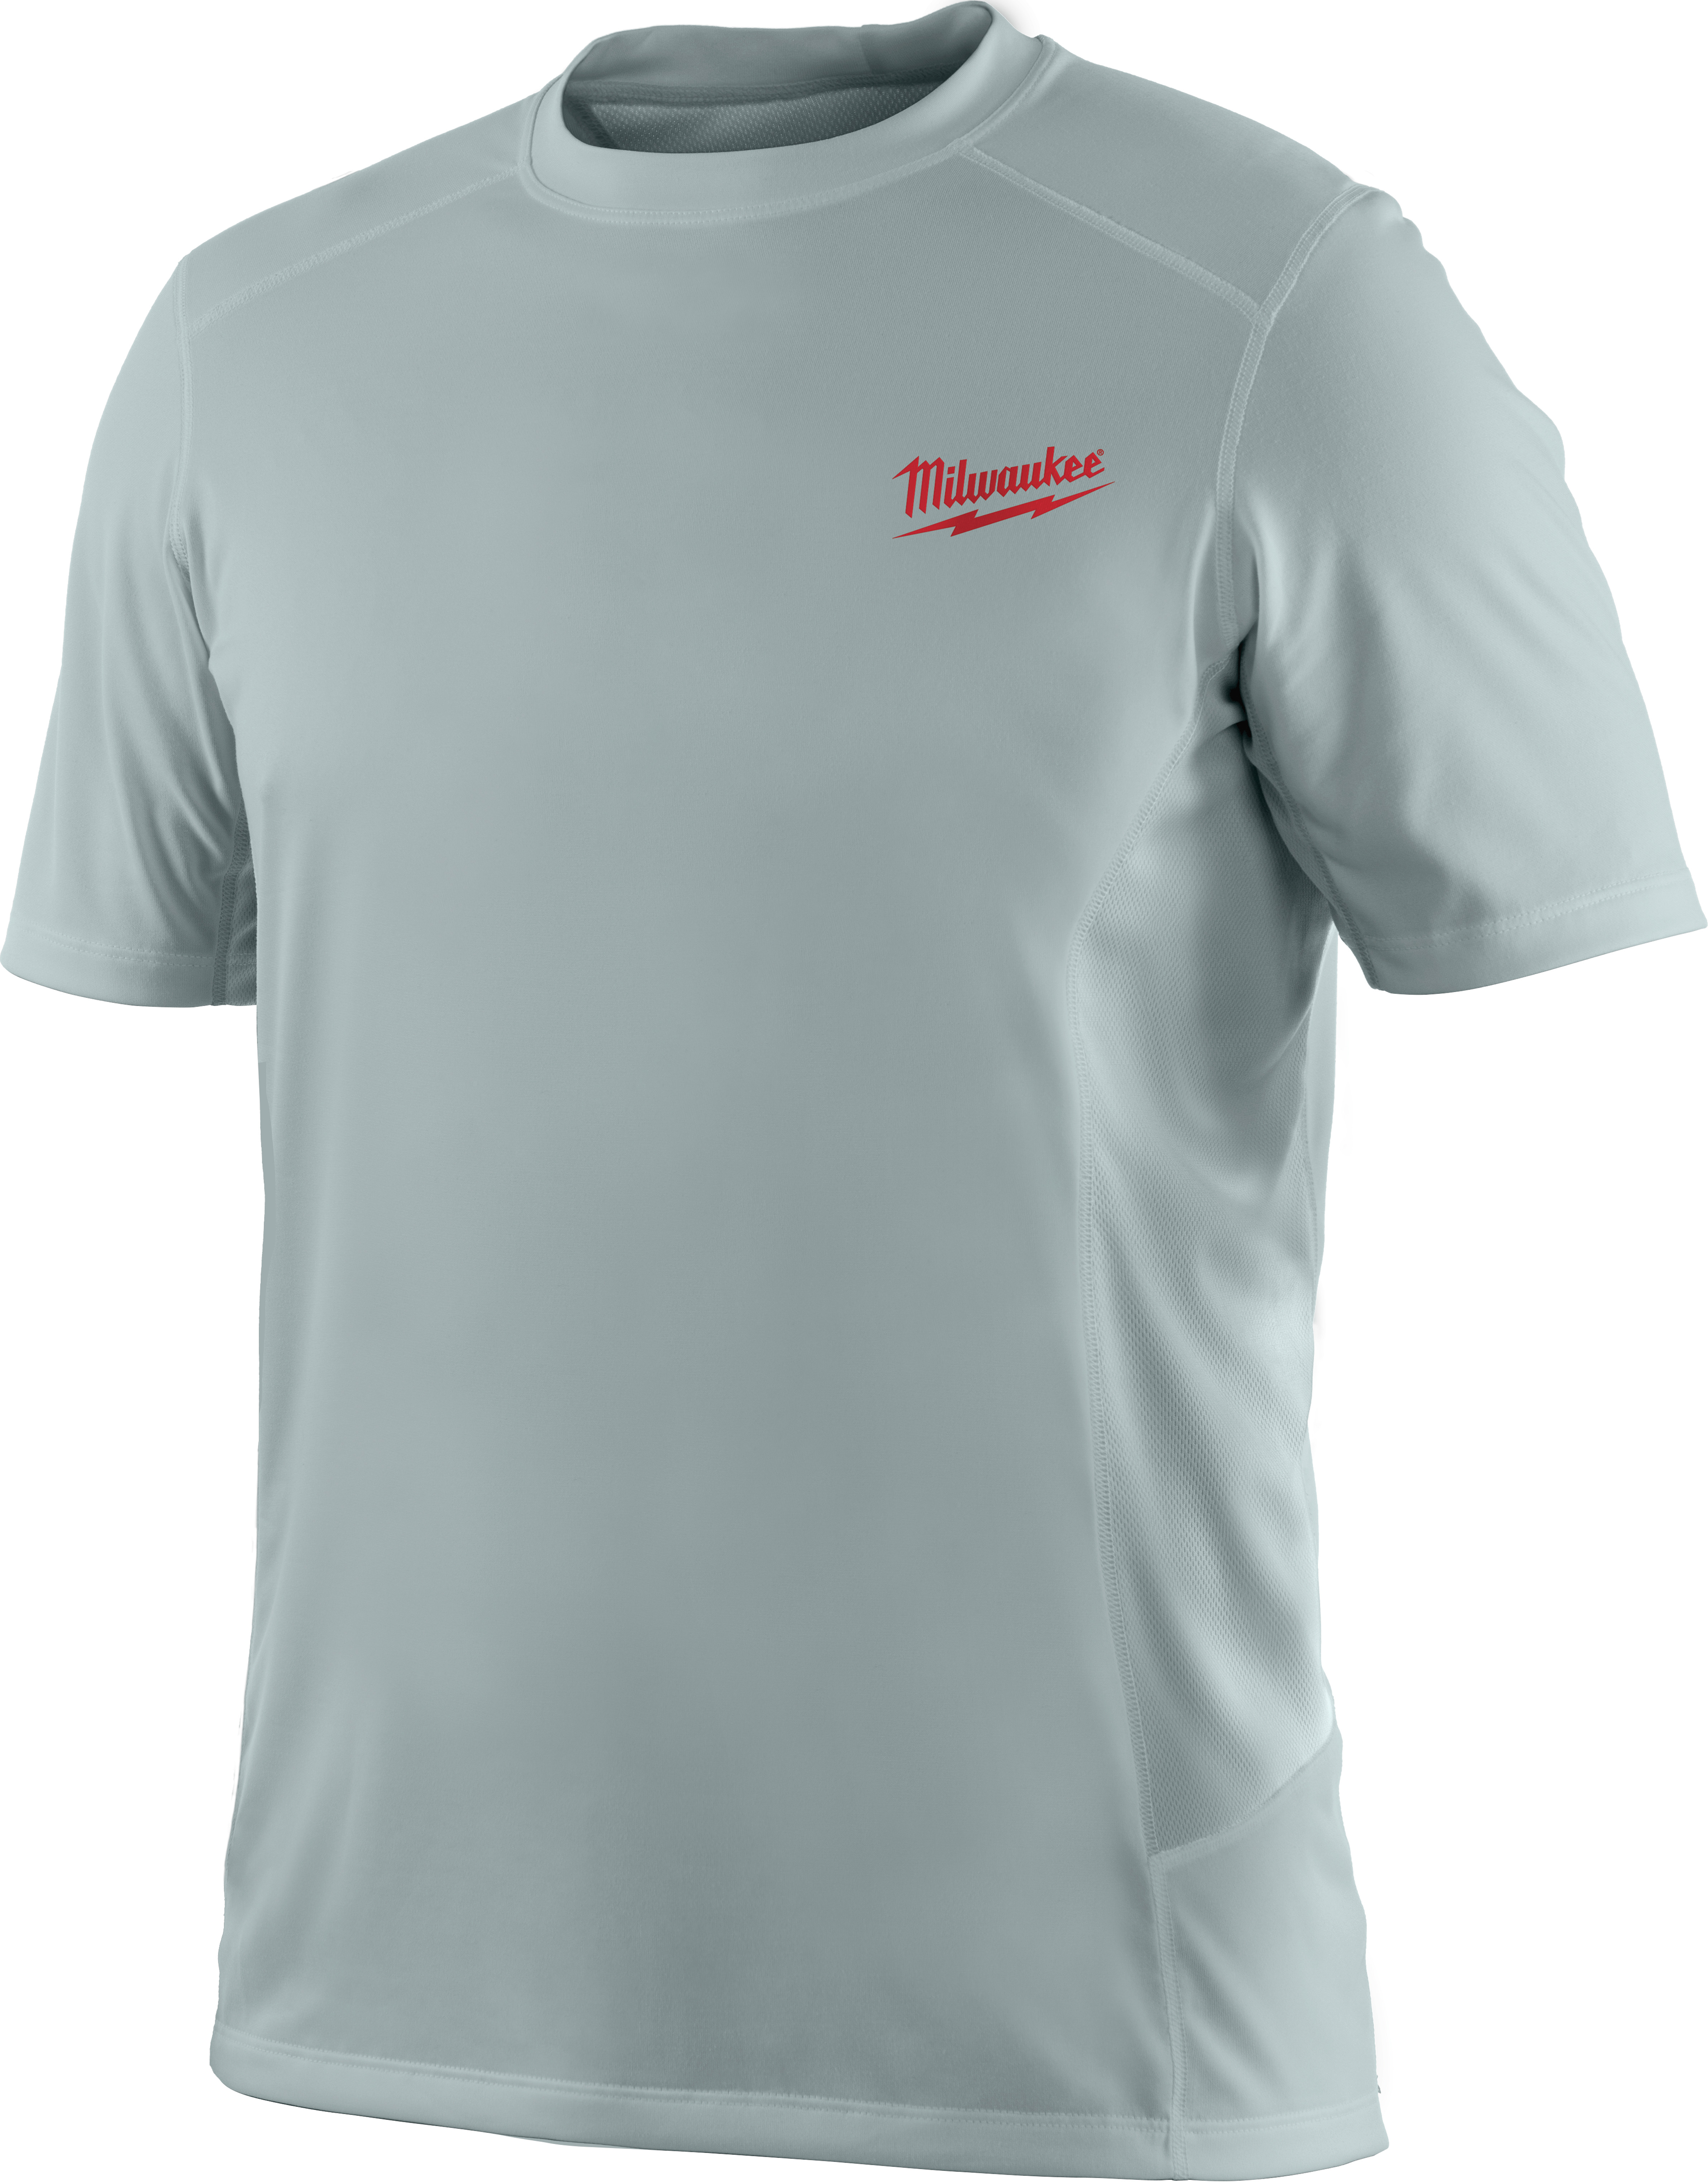 Milwaukee® WorkSkin™ Performance shirts are designed for tradesmen that need their next-to-skin layer to dry fast, keep them cool, and protect them from the sun in hot, summertime working conditions. Unlike cotton or standard wicking shirts, Milwaukee® WorkSkin™ performance shirts utilize patented COOLCORE® fabrics to stay up to 30 percent cooler, wick moisture faster, and prevent uncomfortable saturation from sweat. The addition of fast wicking sweat zones underneath the arms and down the back help accelerate drying in high-sweat areas. Made with fabrics that resist pilling and snagging from repeated daily use, Milwaukee® WorkSkin™ performance shirts stay dry and stay cool to reduce fatigue from the hard work in the heat. 15684